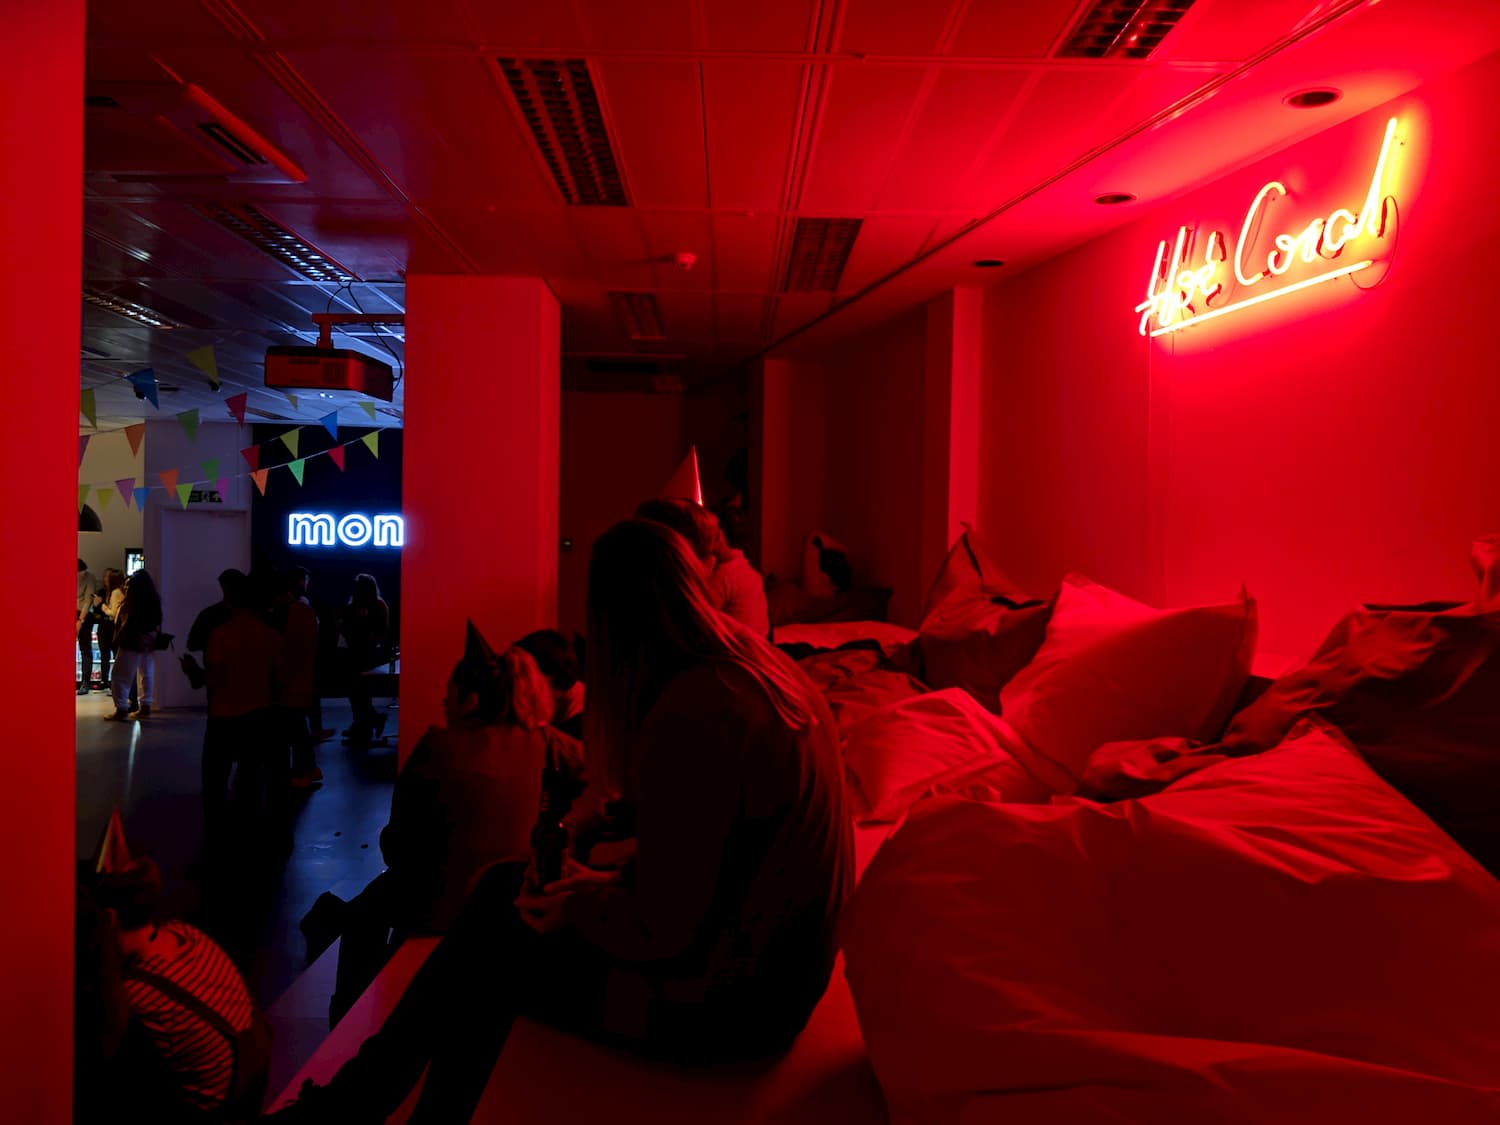 On the right wall a neon sign reads 'Hot Coral' and is projecting a pink glow onto people sat wearing party hats